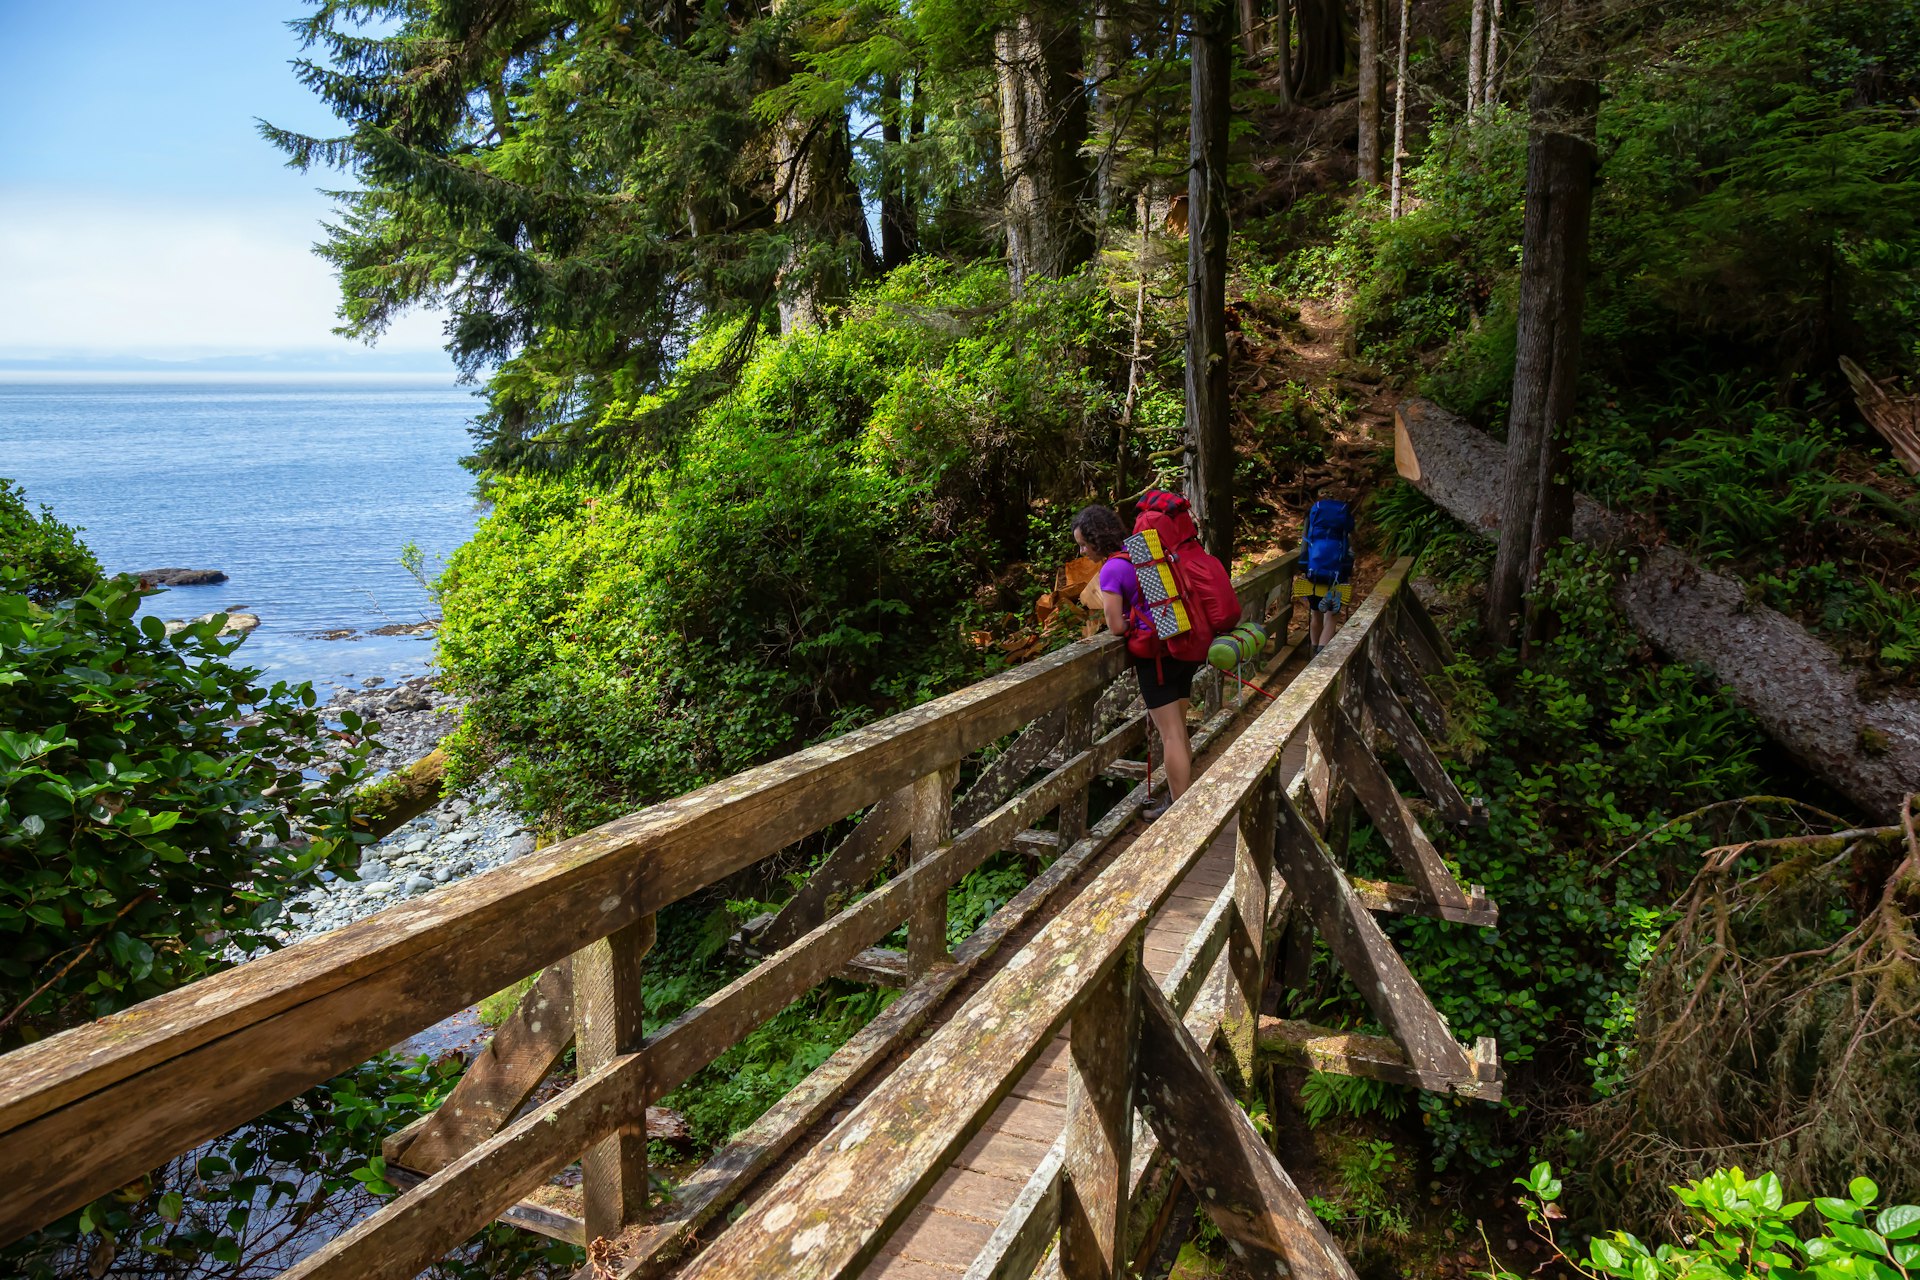 Two hikers are crossing a wooden bridge in a forested area along the Juan de Fuca Trail on Vancouver Island